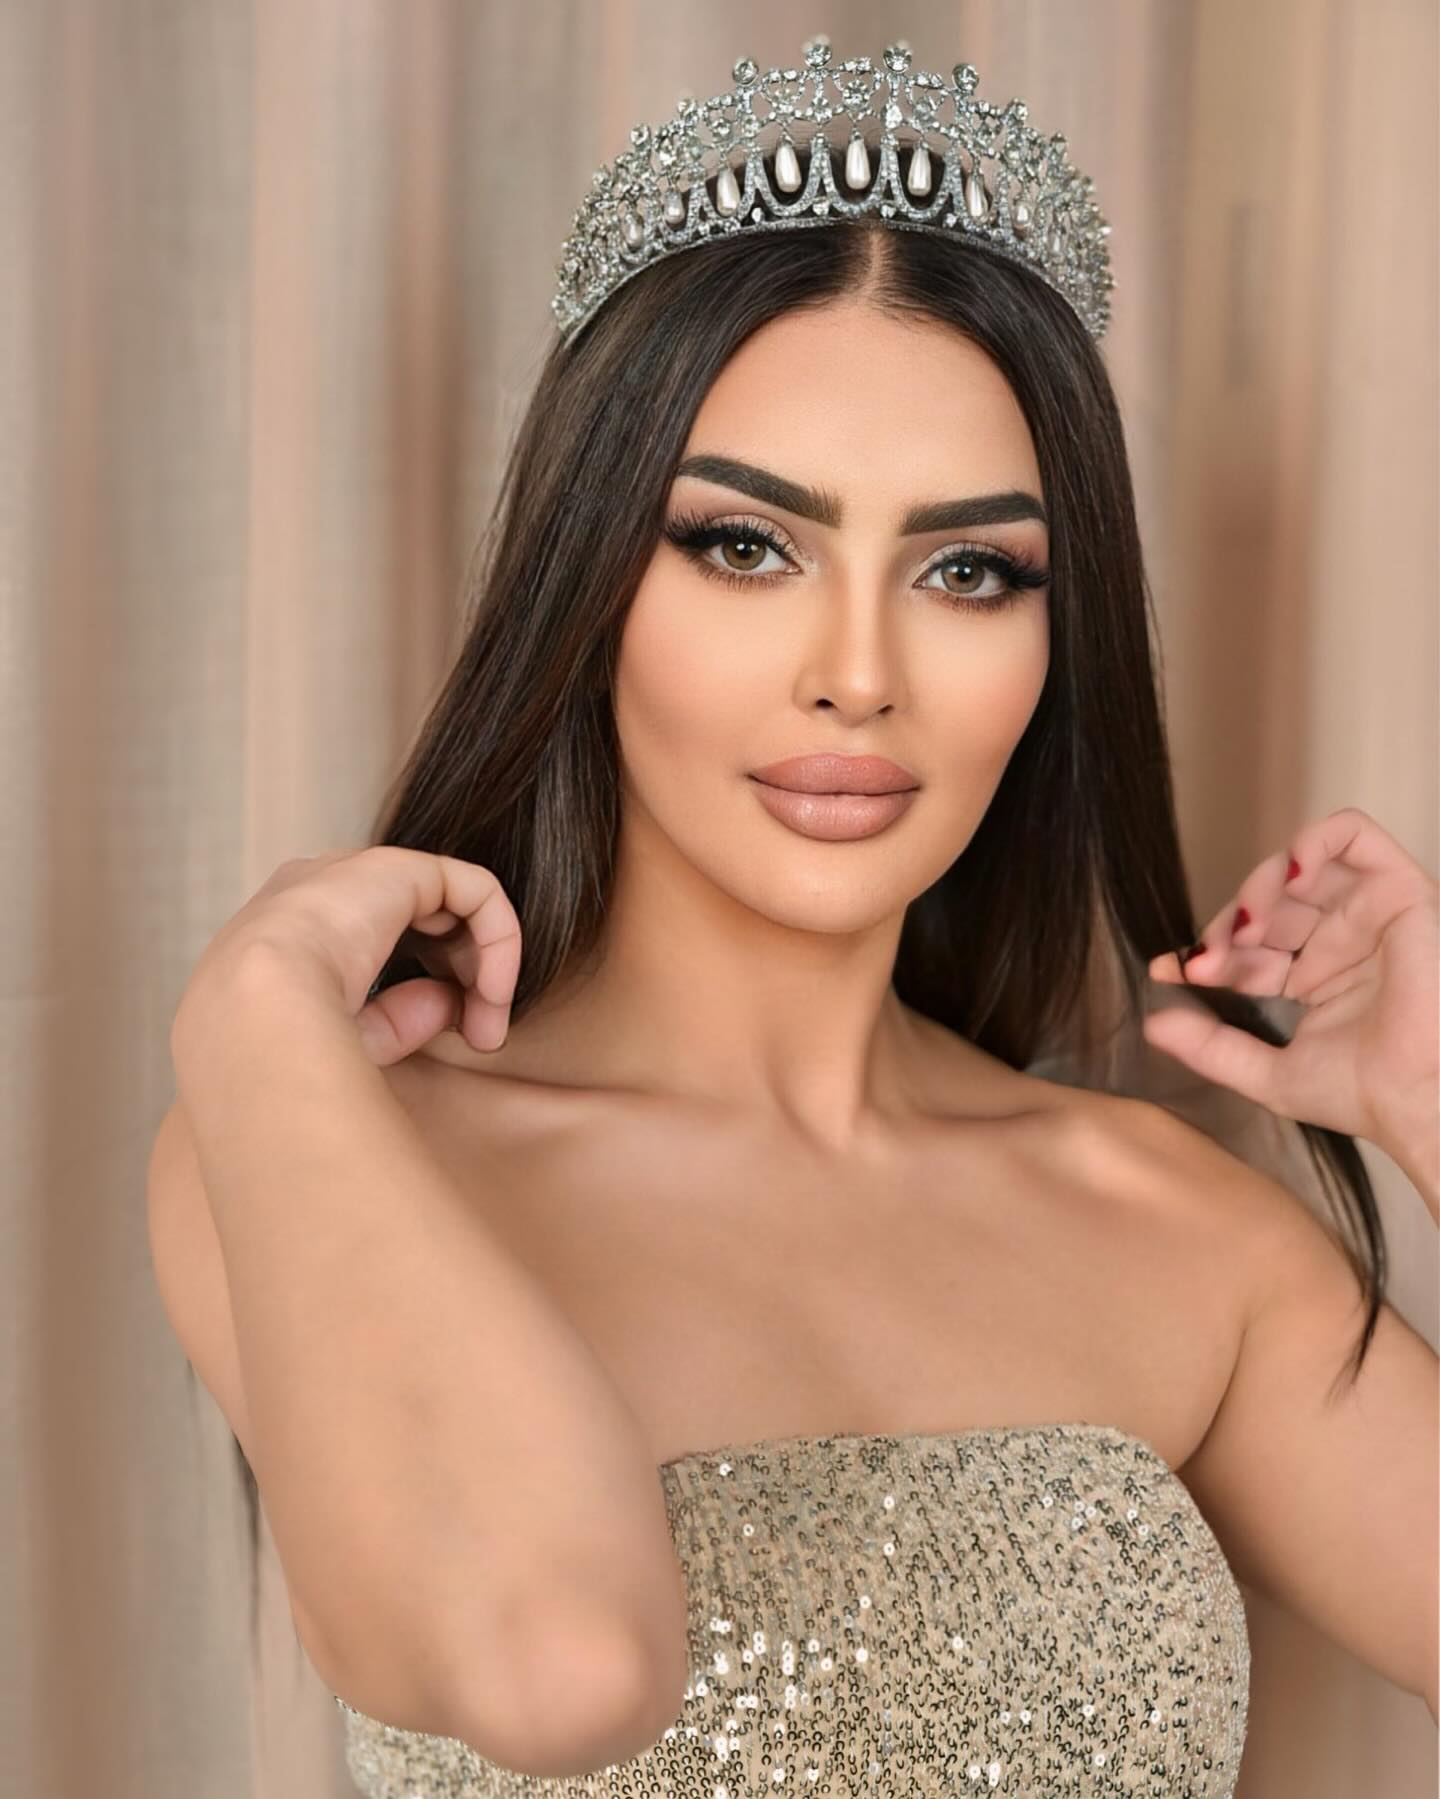 Who is Rumy Alqahtani? Get to know Saudi Arabia's first Miss Universe